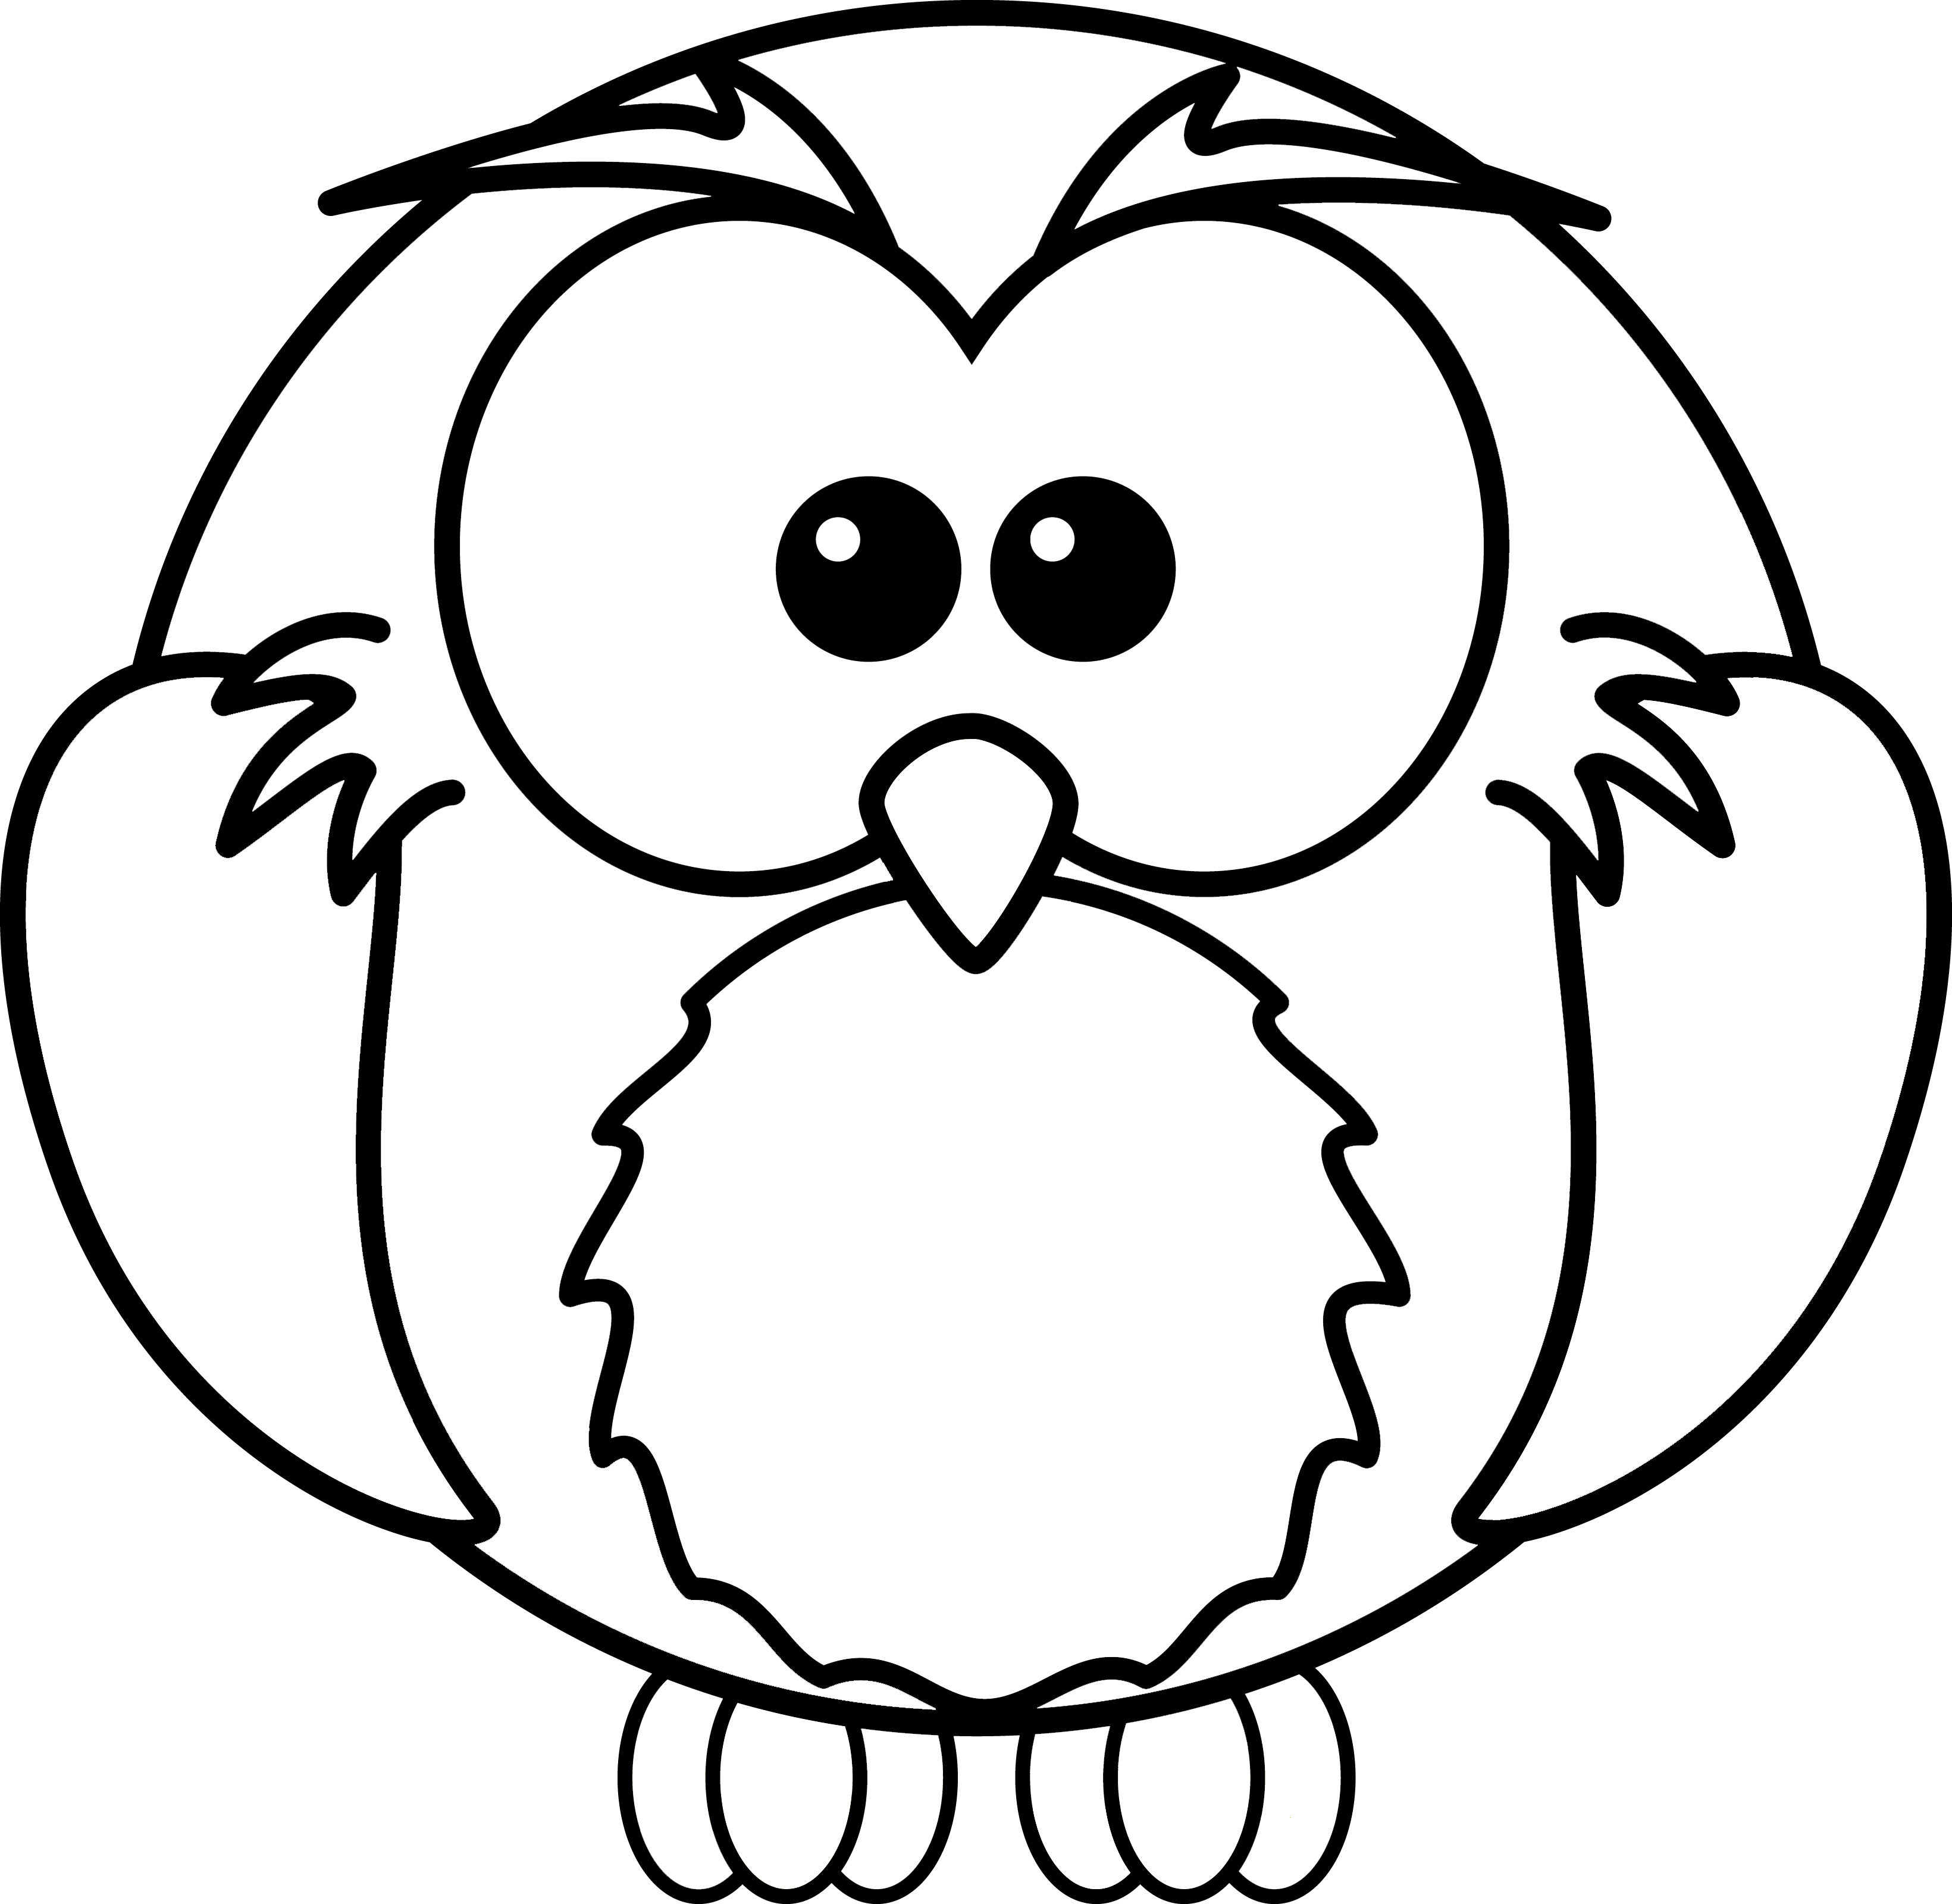 Cartoon Owl Coloring Pages - Clip Art Coloring Pages